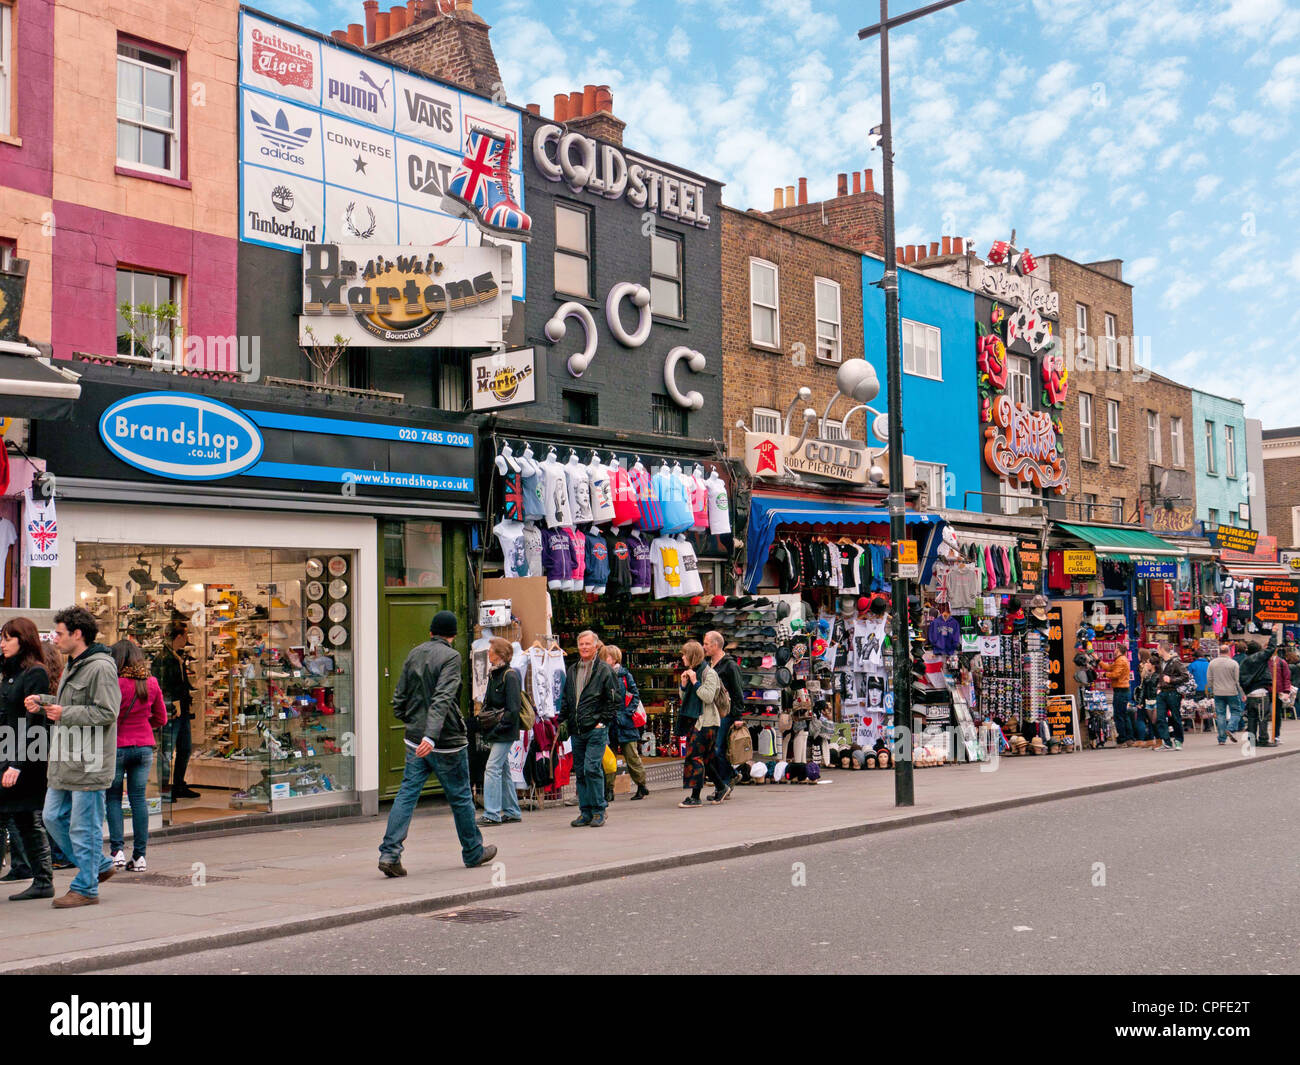 People and tourists shopping in a street in Camden Market, London, UK Stock Photo